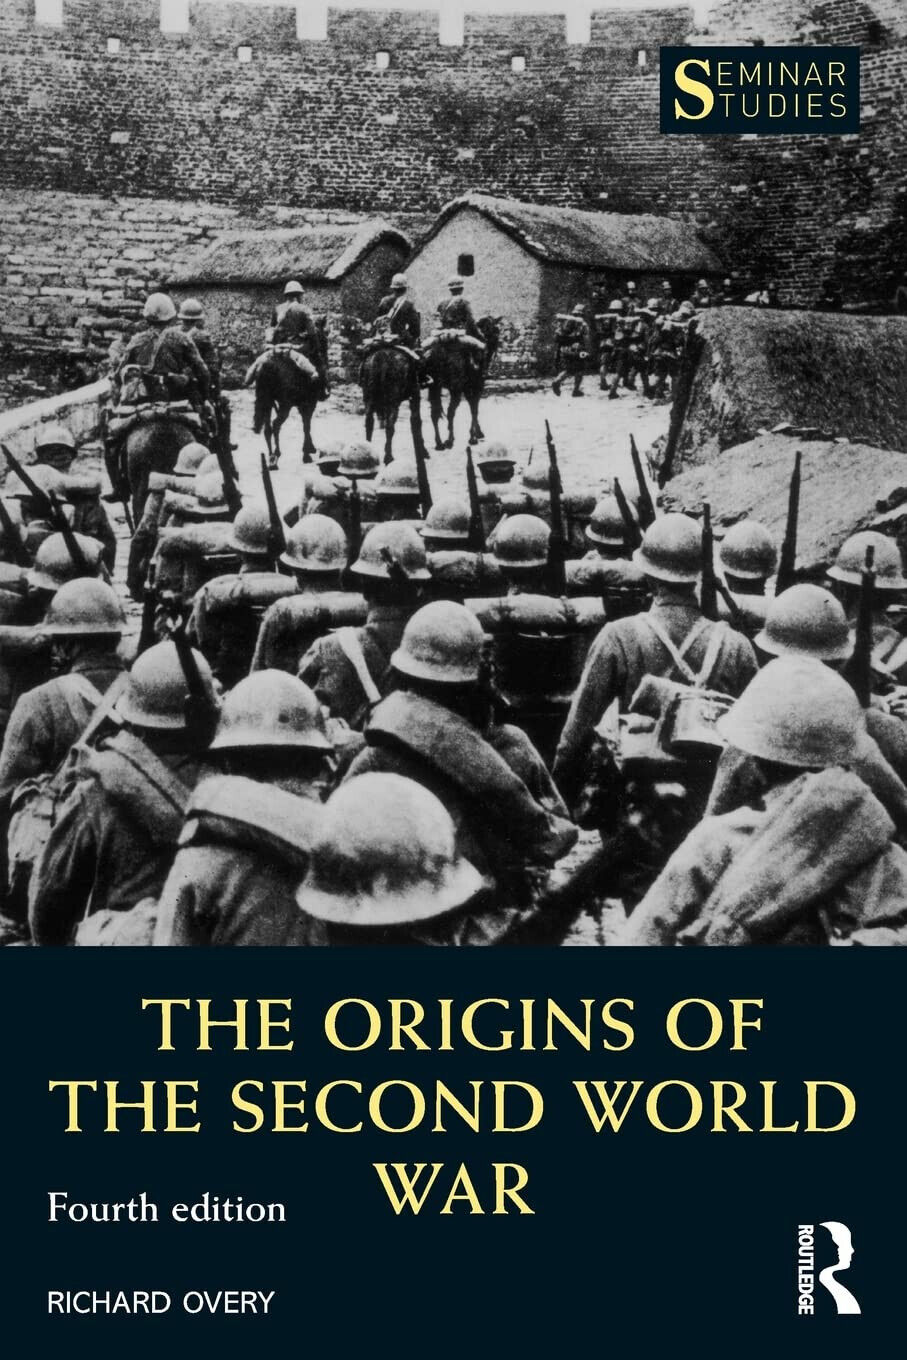 The Origins of the Second World War - Richard Overy - Routledge, 2016